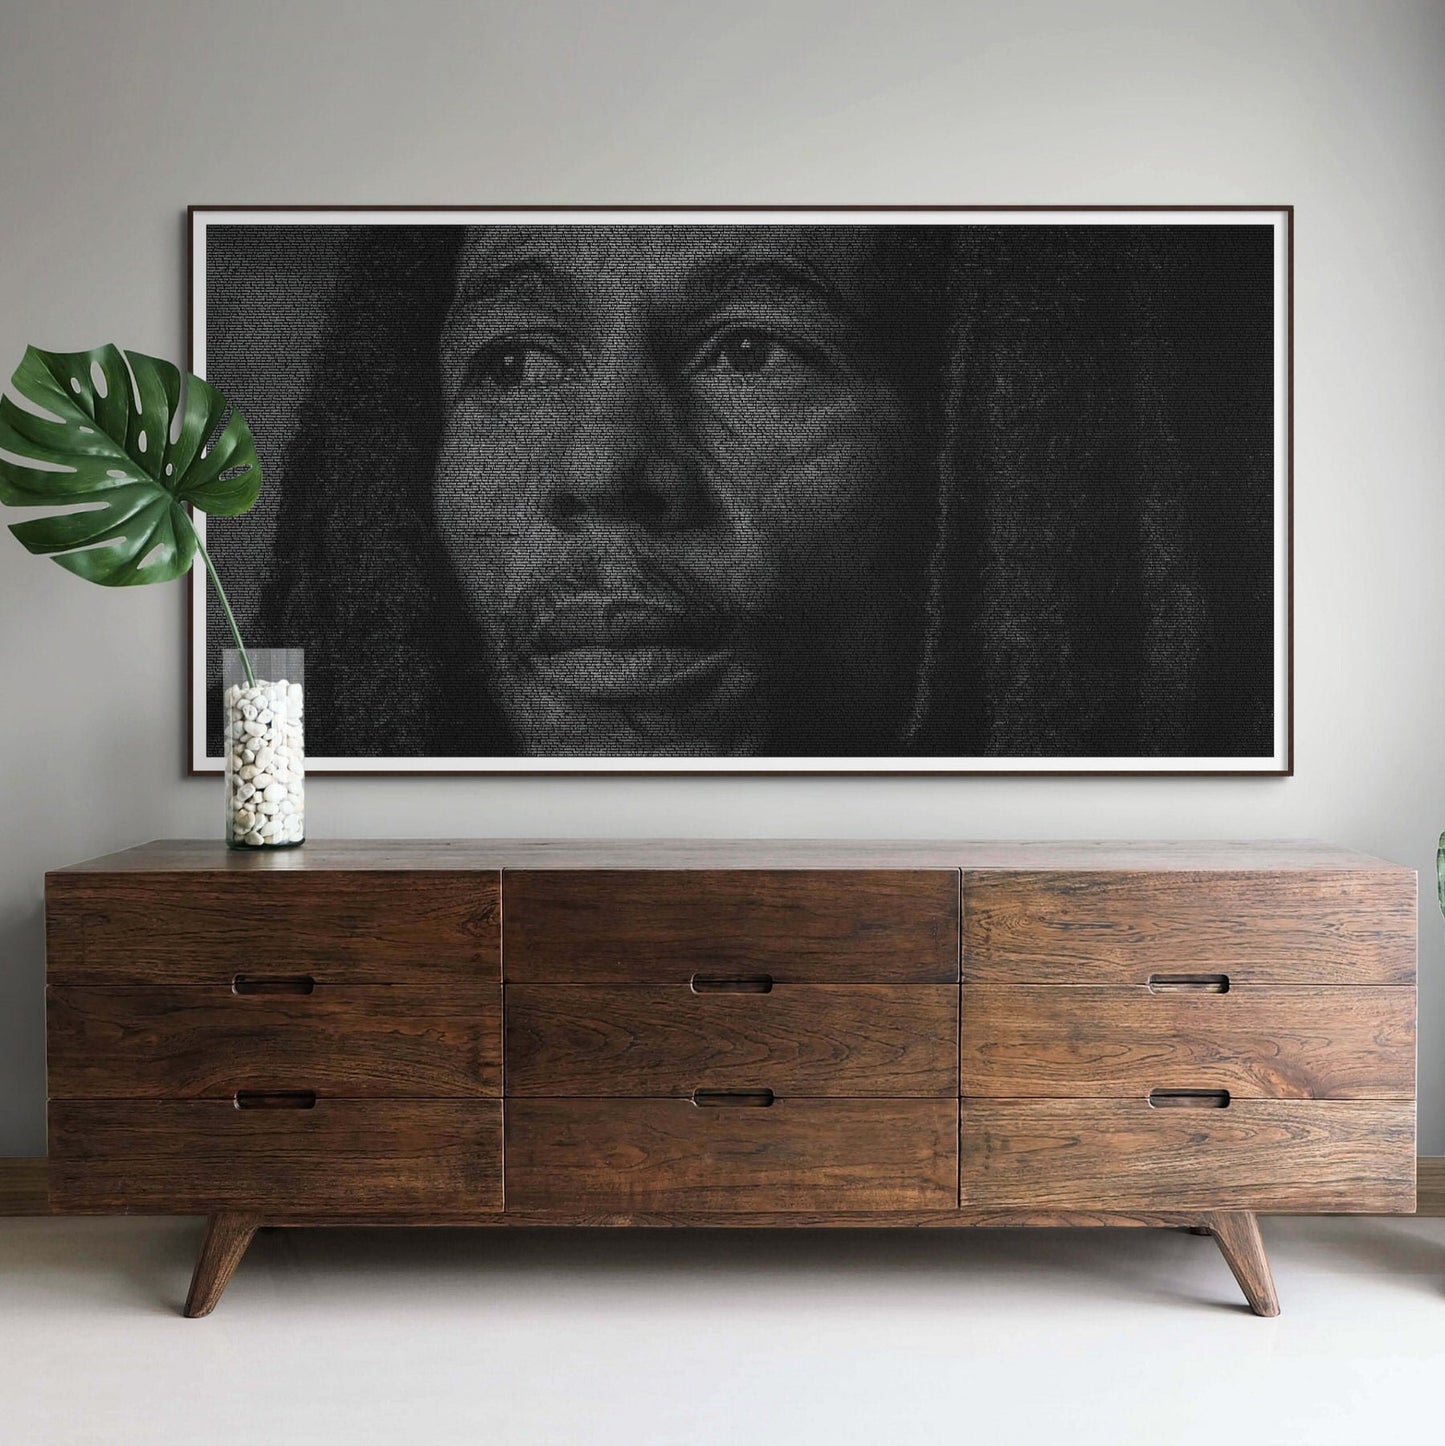 A black and white typographic portrait of Bob Marley, created from his song lyrics. Framed on a grey wall above a dresser.